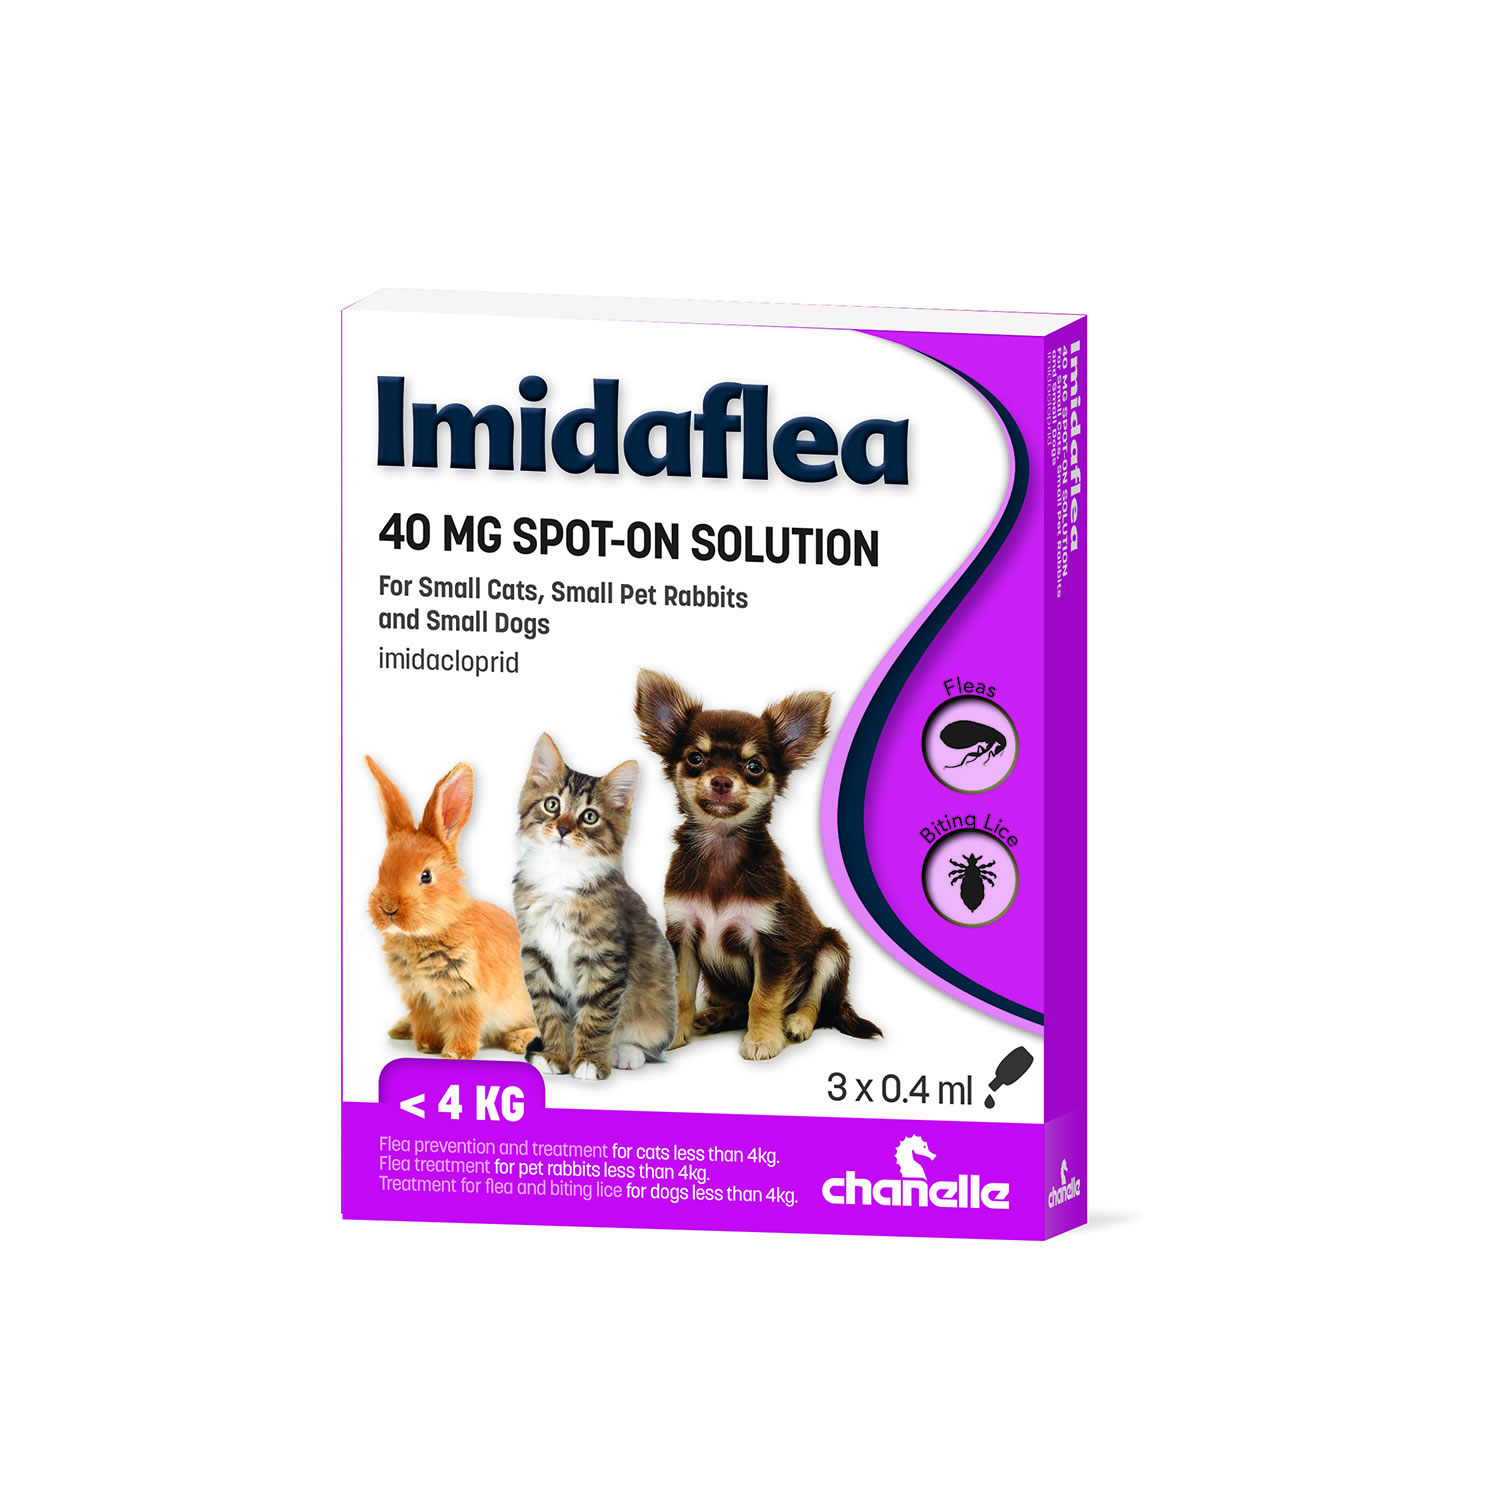 CHANELLE IMIDAFLEA 40GM SPOT-ON FOR SMALL PETS 3 PIPETTES UNDER 4 KG - 3 PIPETTES